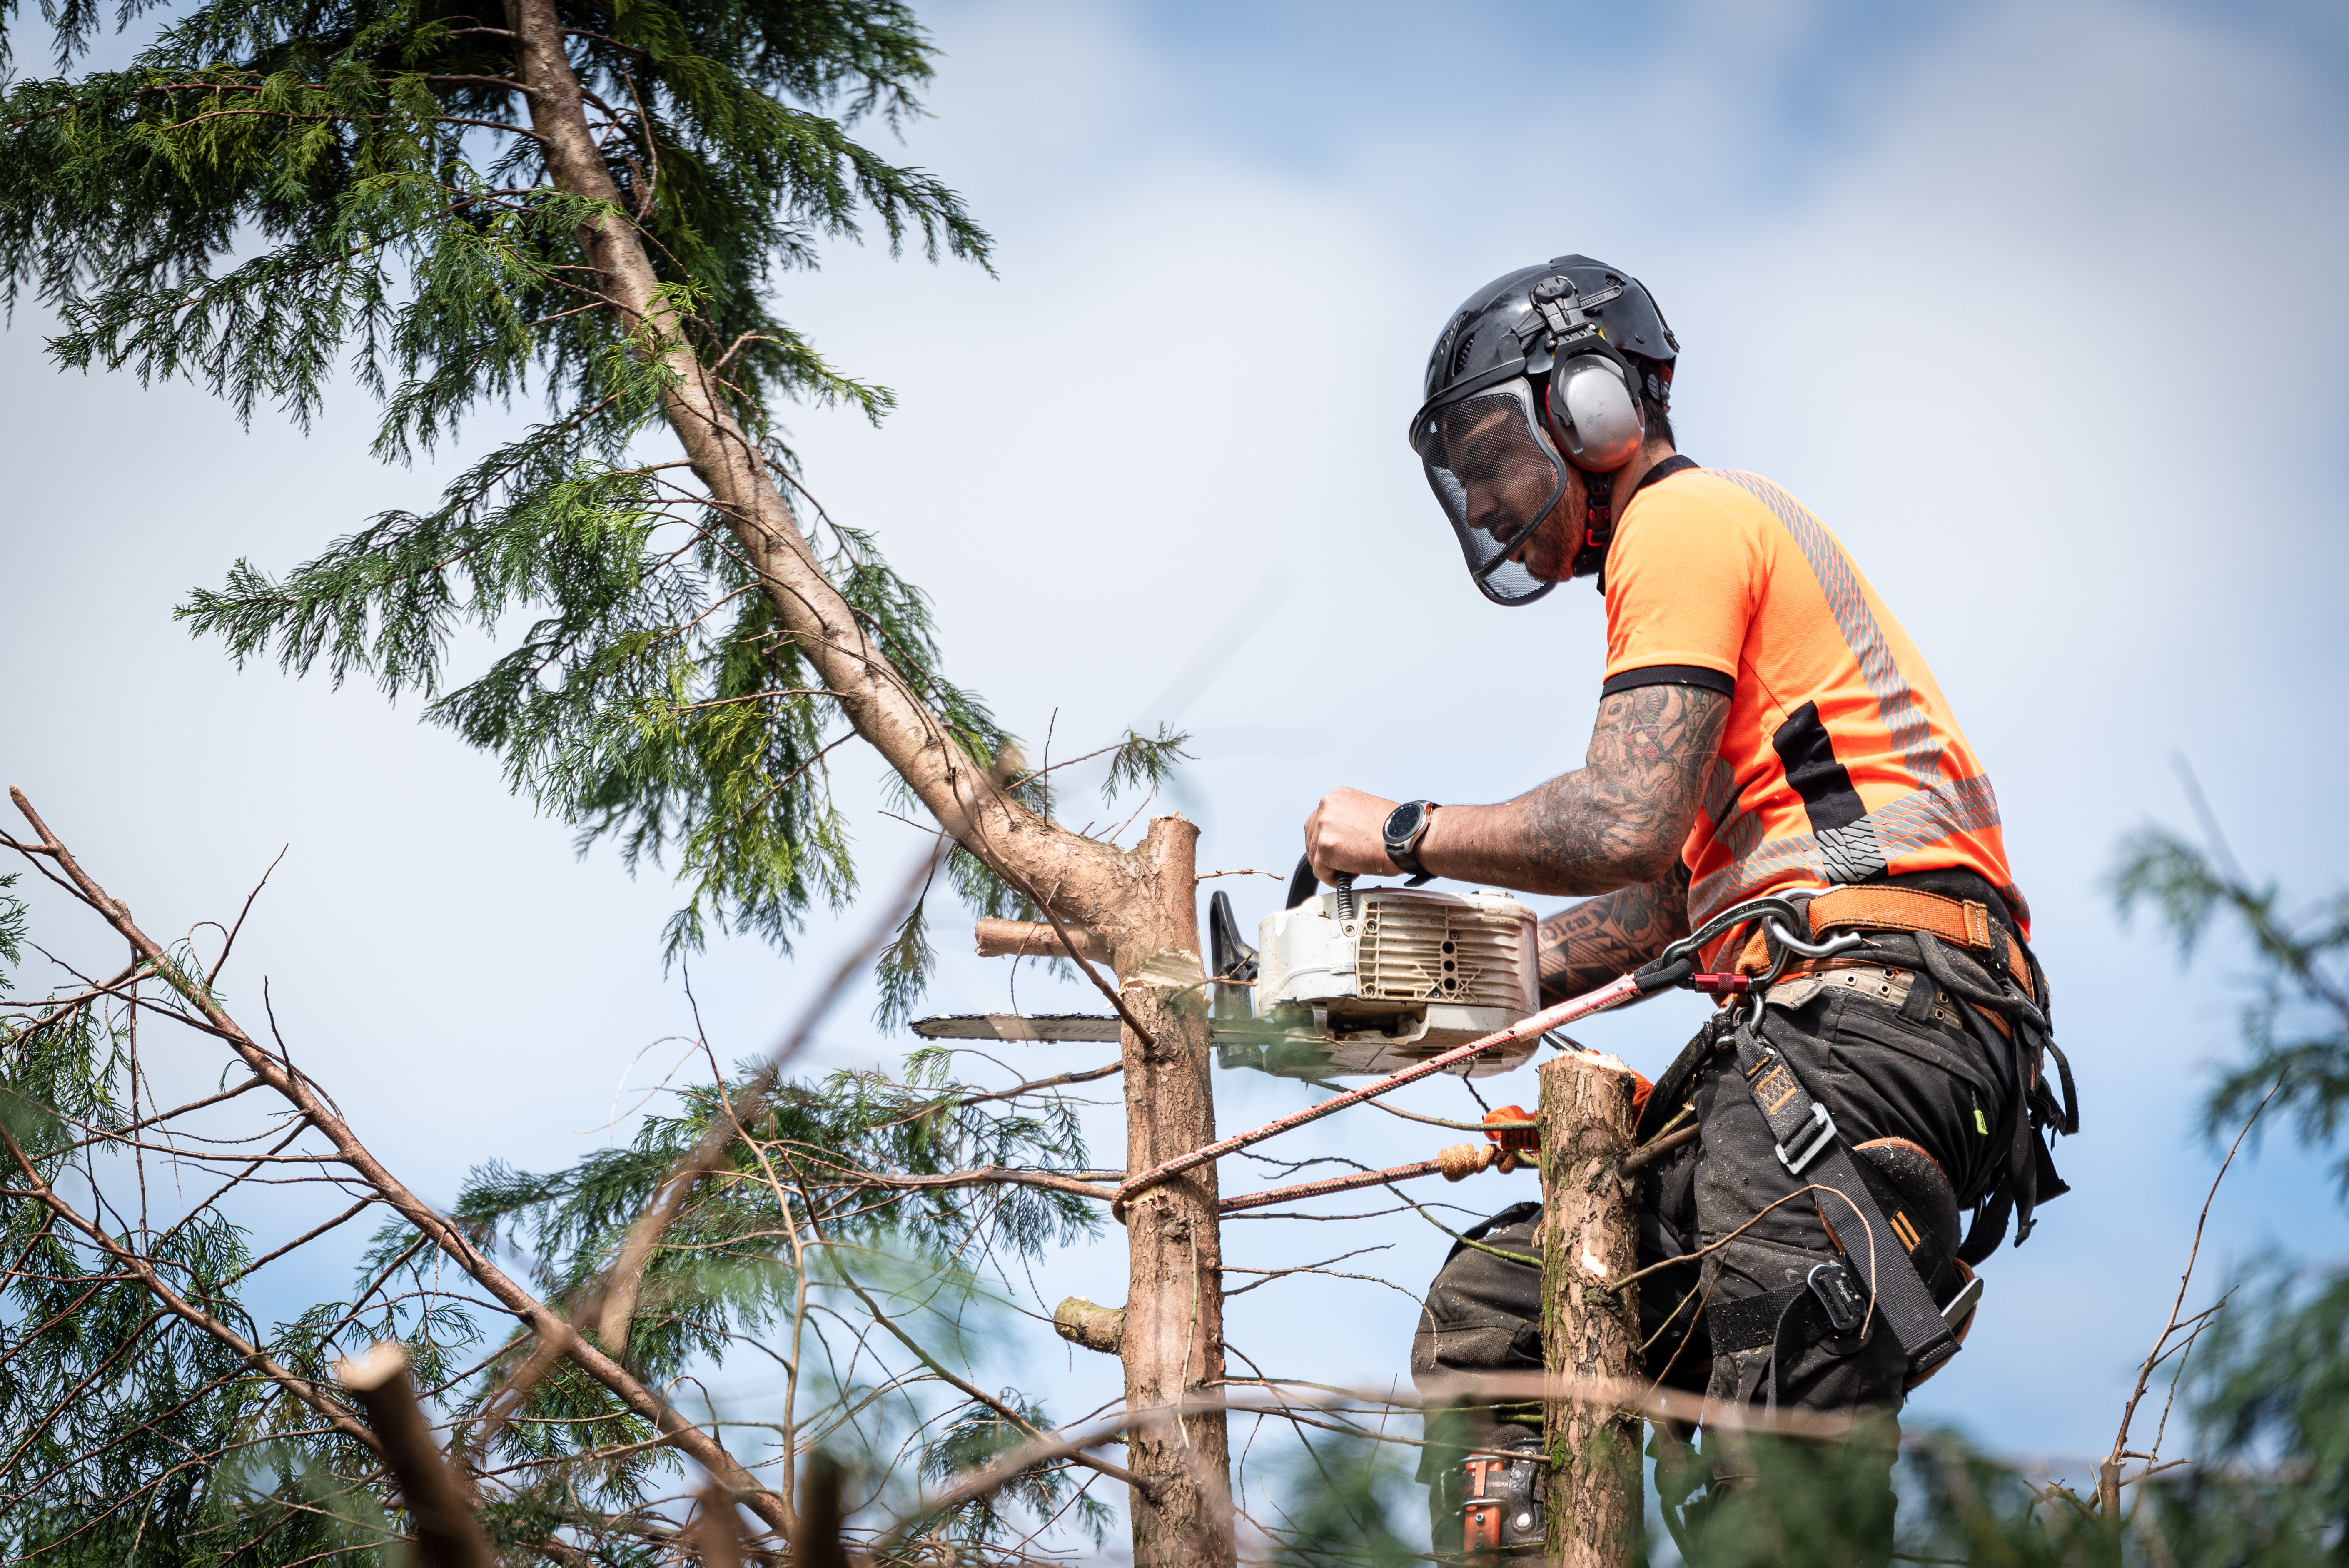 Tree Surgeon In a Tree